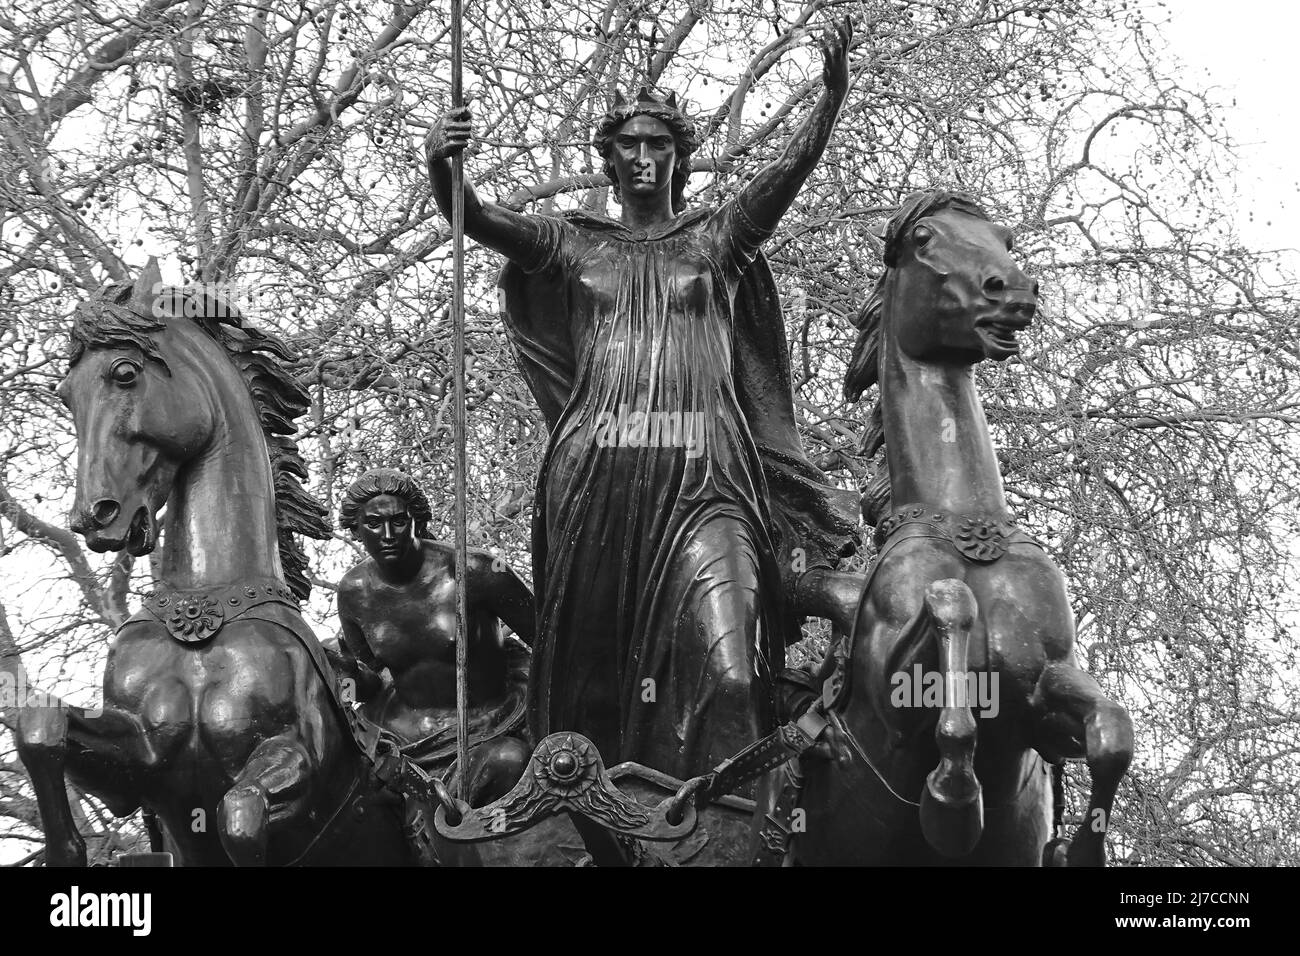 Westminster, London, 2022. Boadicea and Her Daughters is a bronze sculpture in London representing Boudica, queen of the Celtic Iceni tribe, who led a Stock Photo